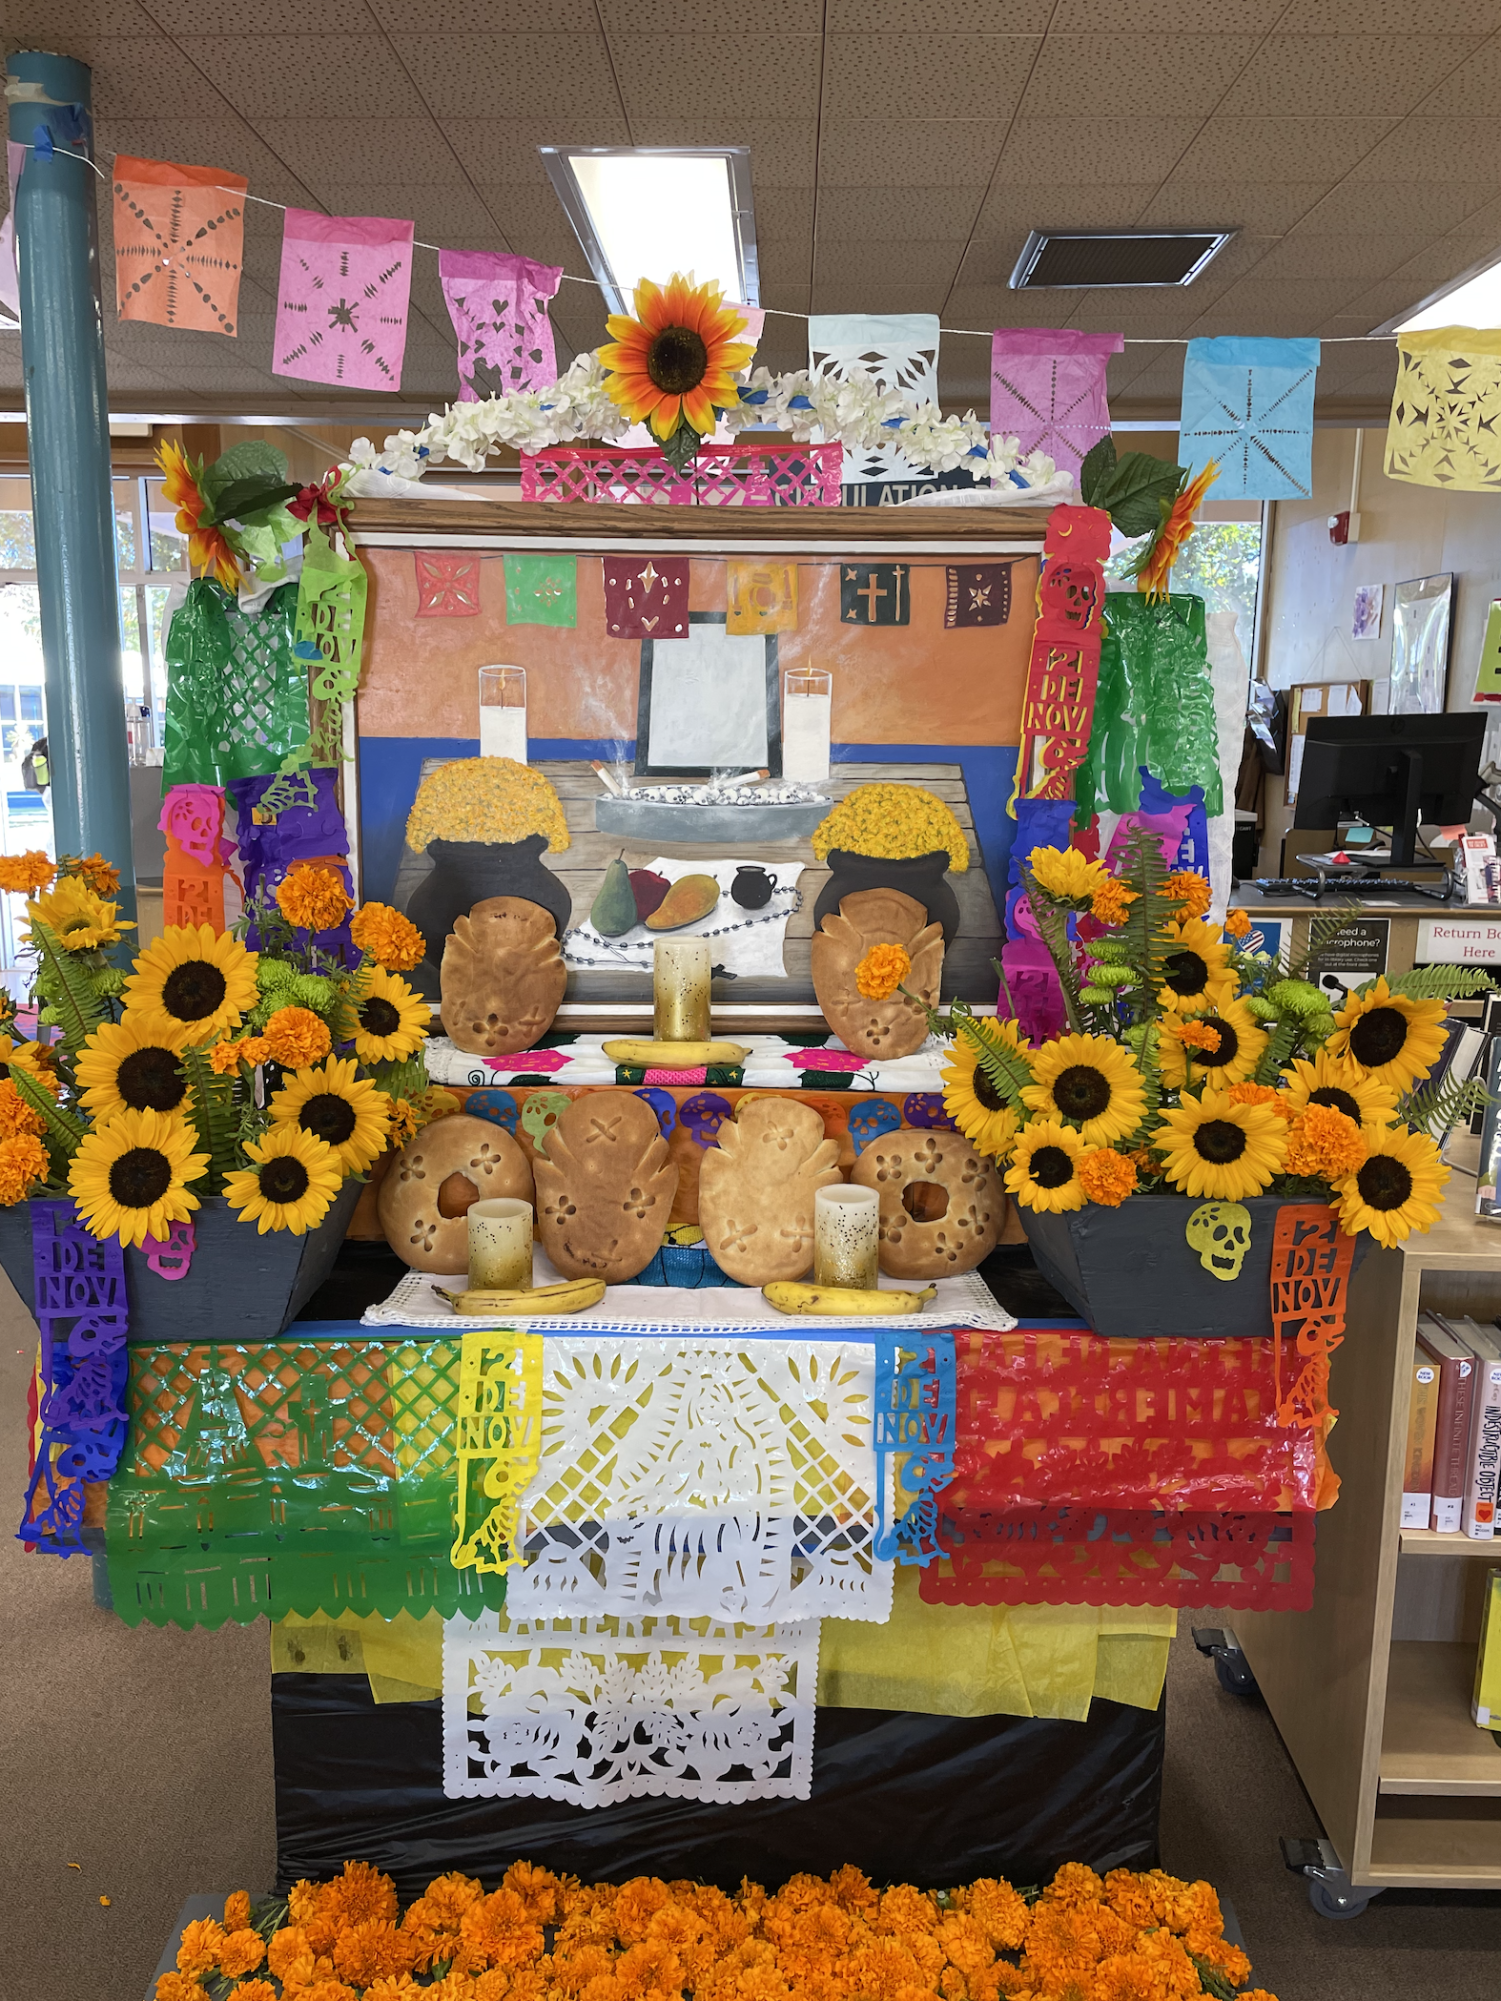 Ofrenda on display in the library